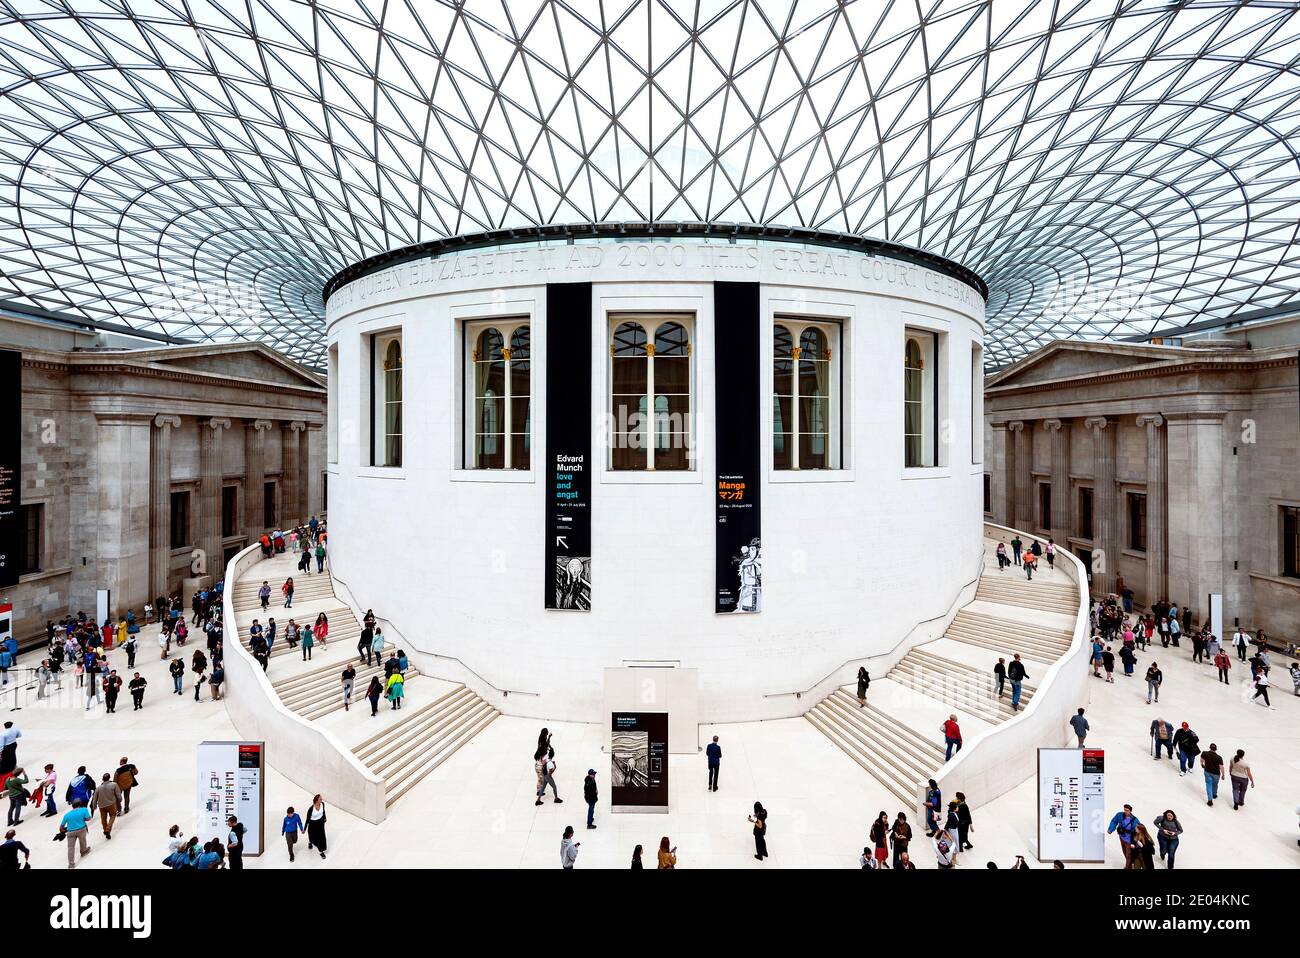 Le British Museum, The Great court, Londres, Angleterre. Banque D'Images